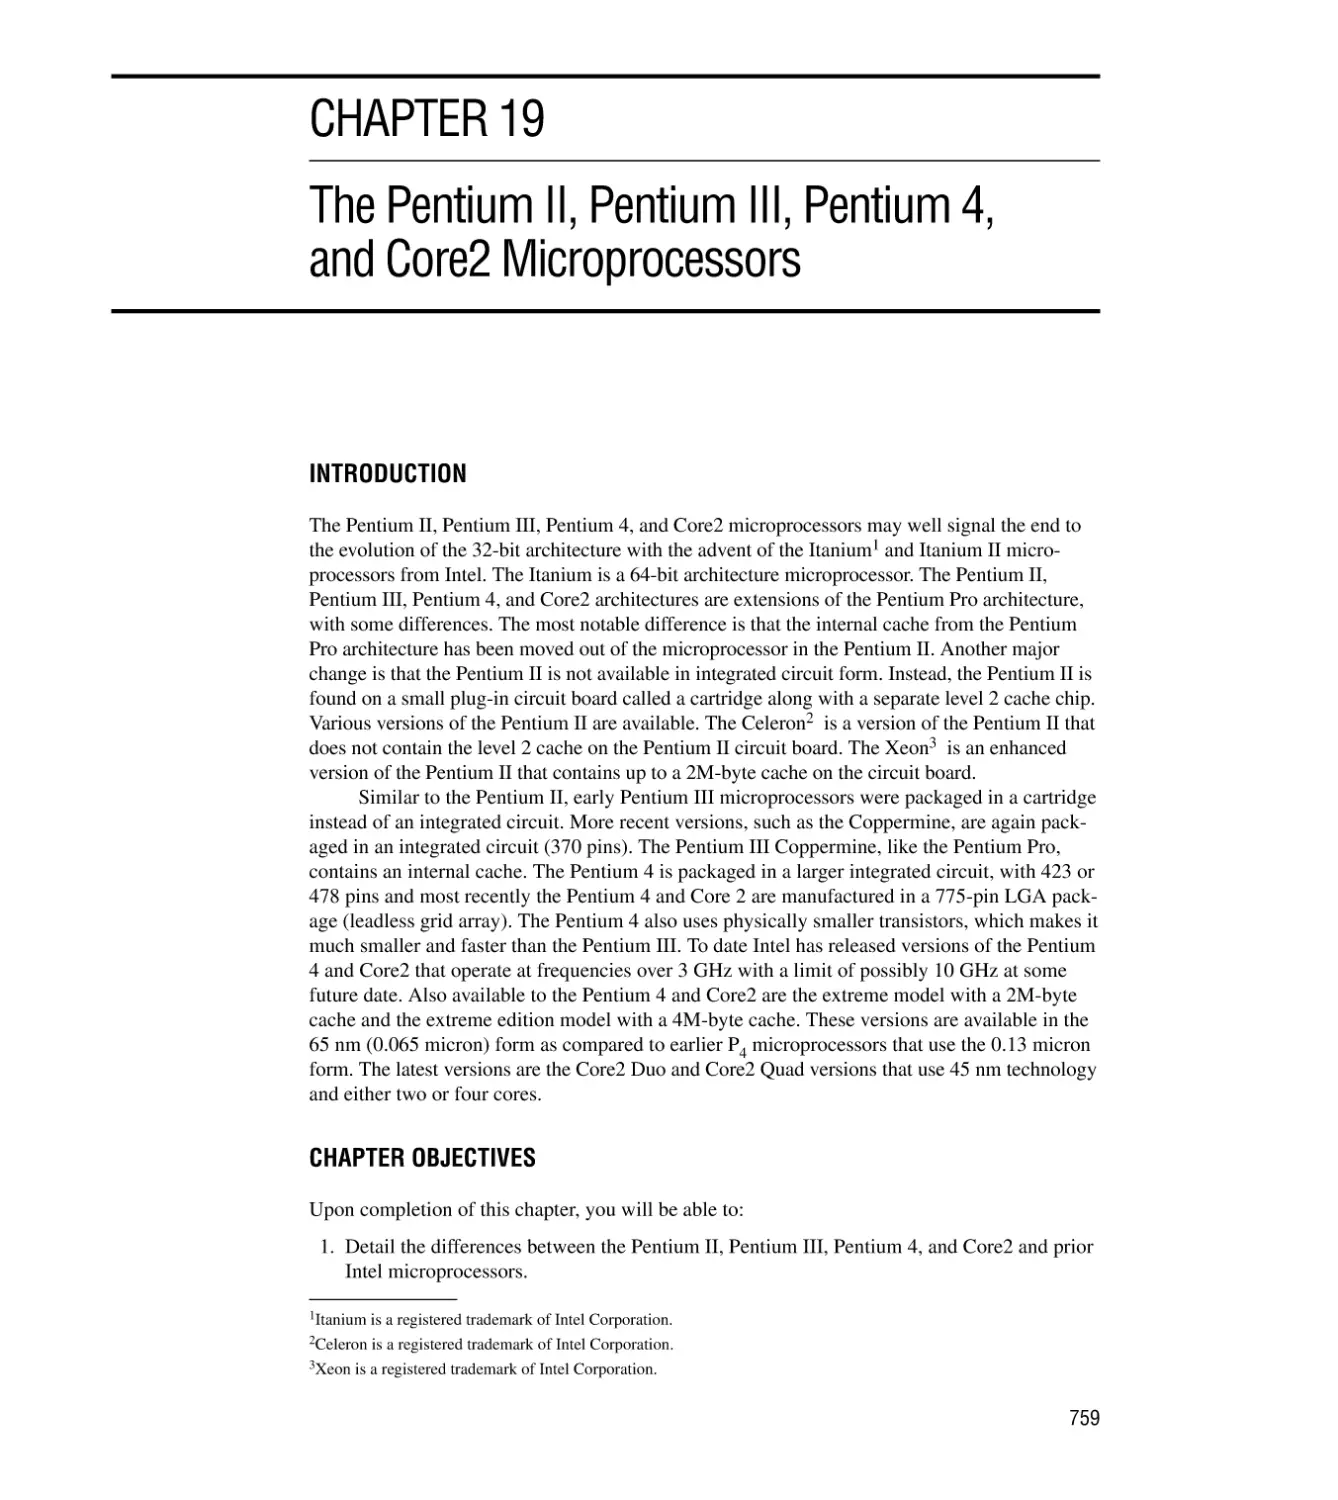 CHAPTER 19 THE PENTIUM II, PENTIUM III, PENTIUM 4, AND CORE2 MICROPROCESSORS
Introduction/Chapter Objectives